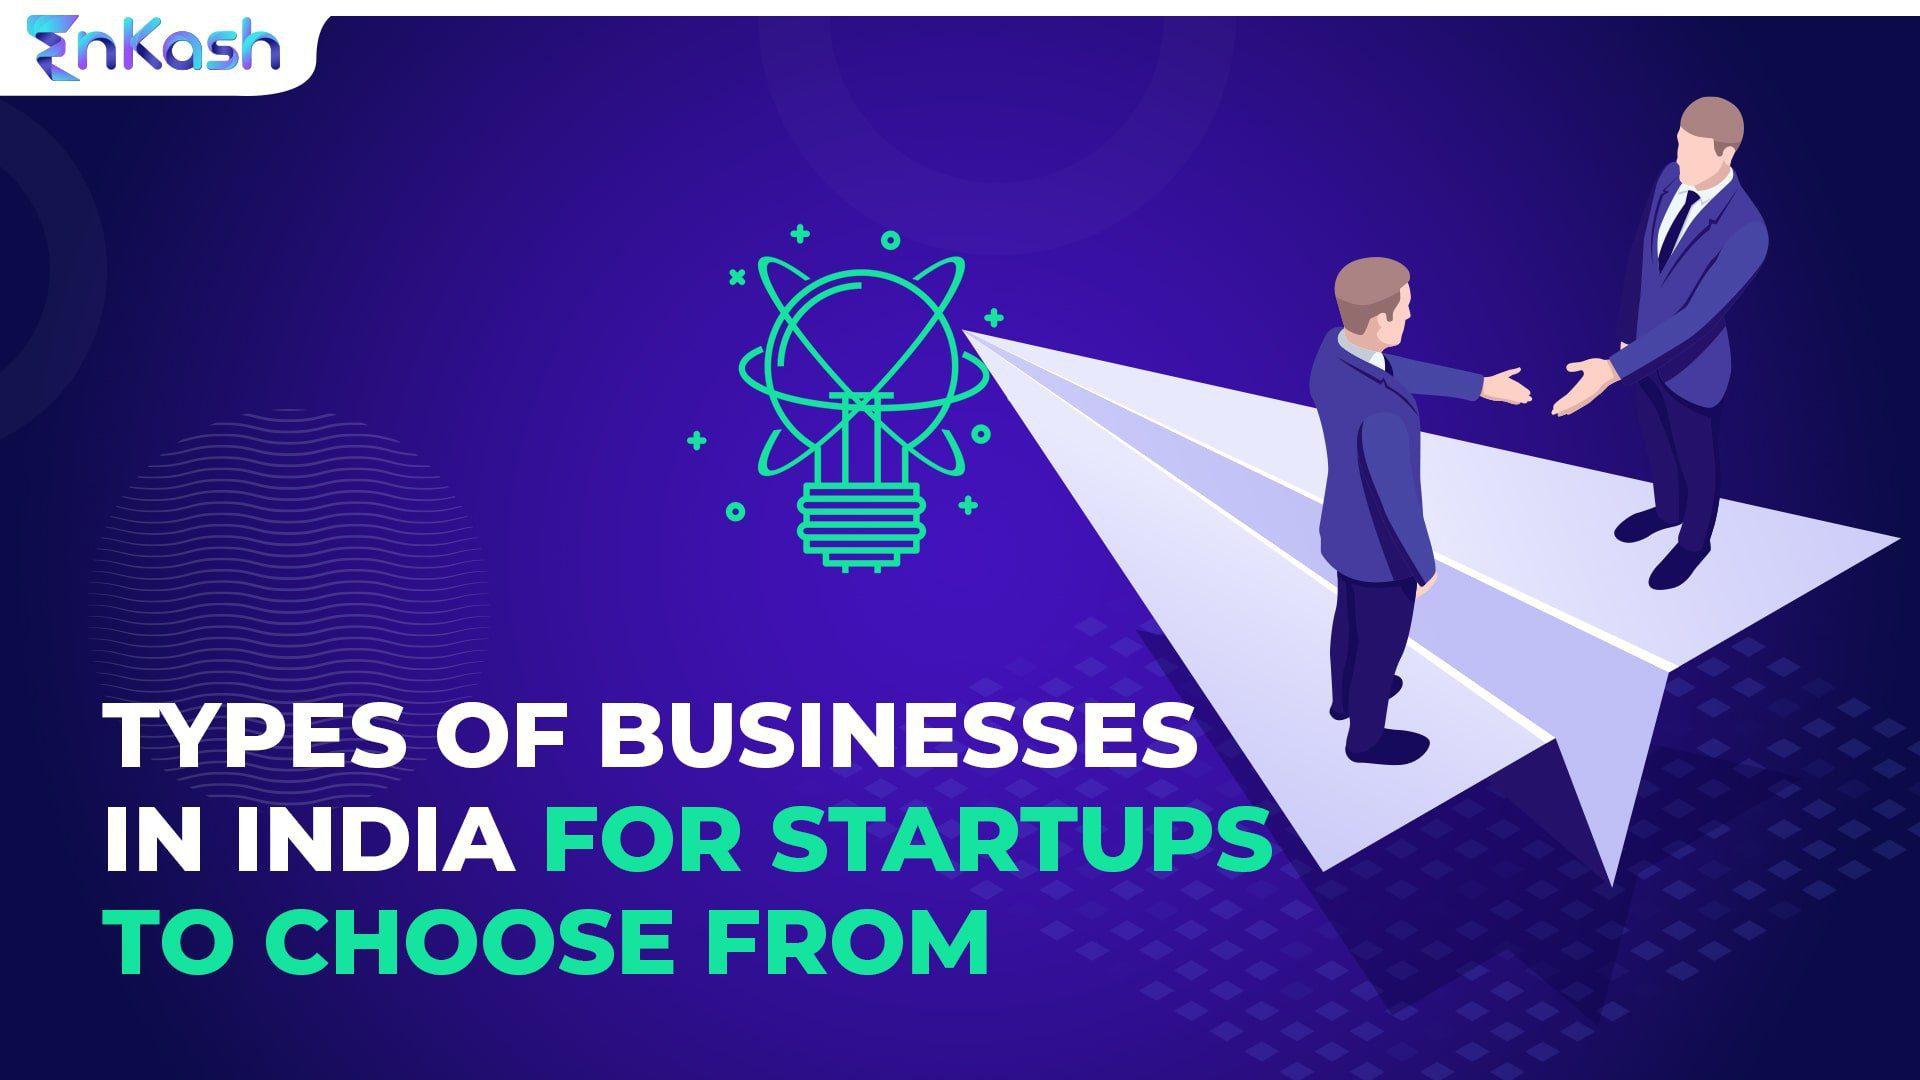 Types of businesses in India for startups